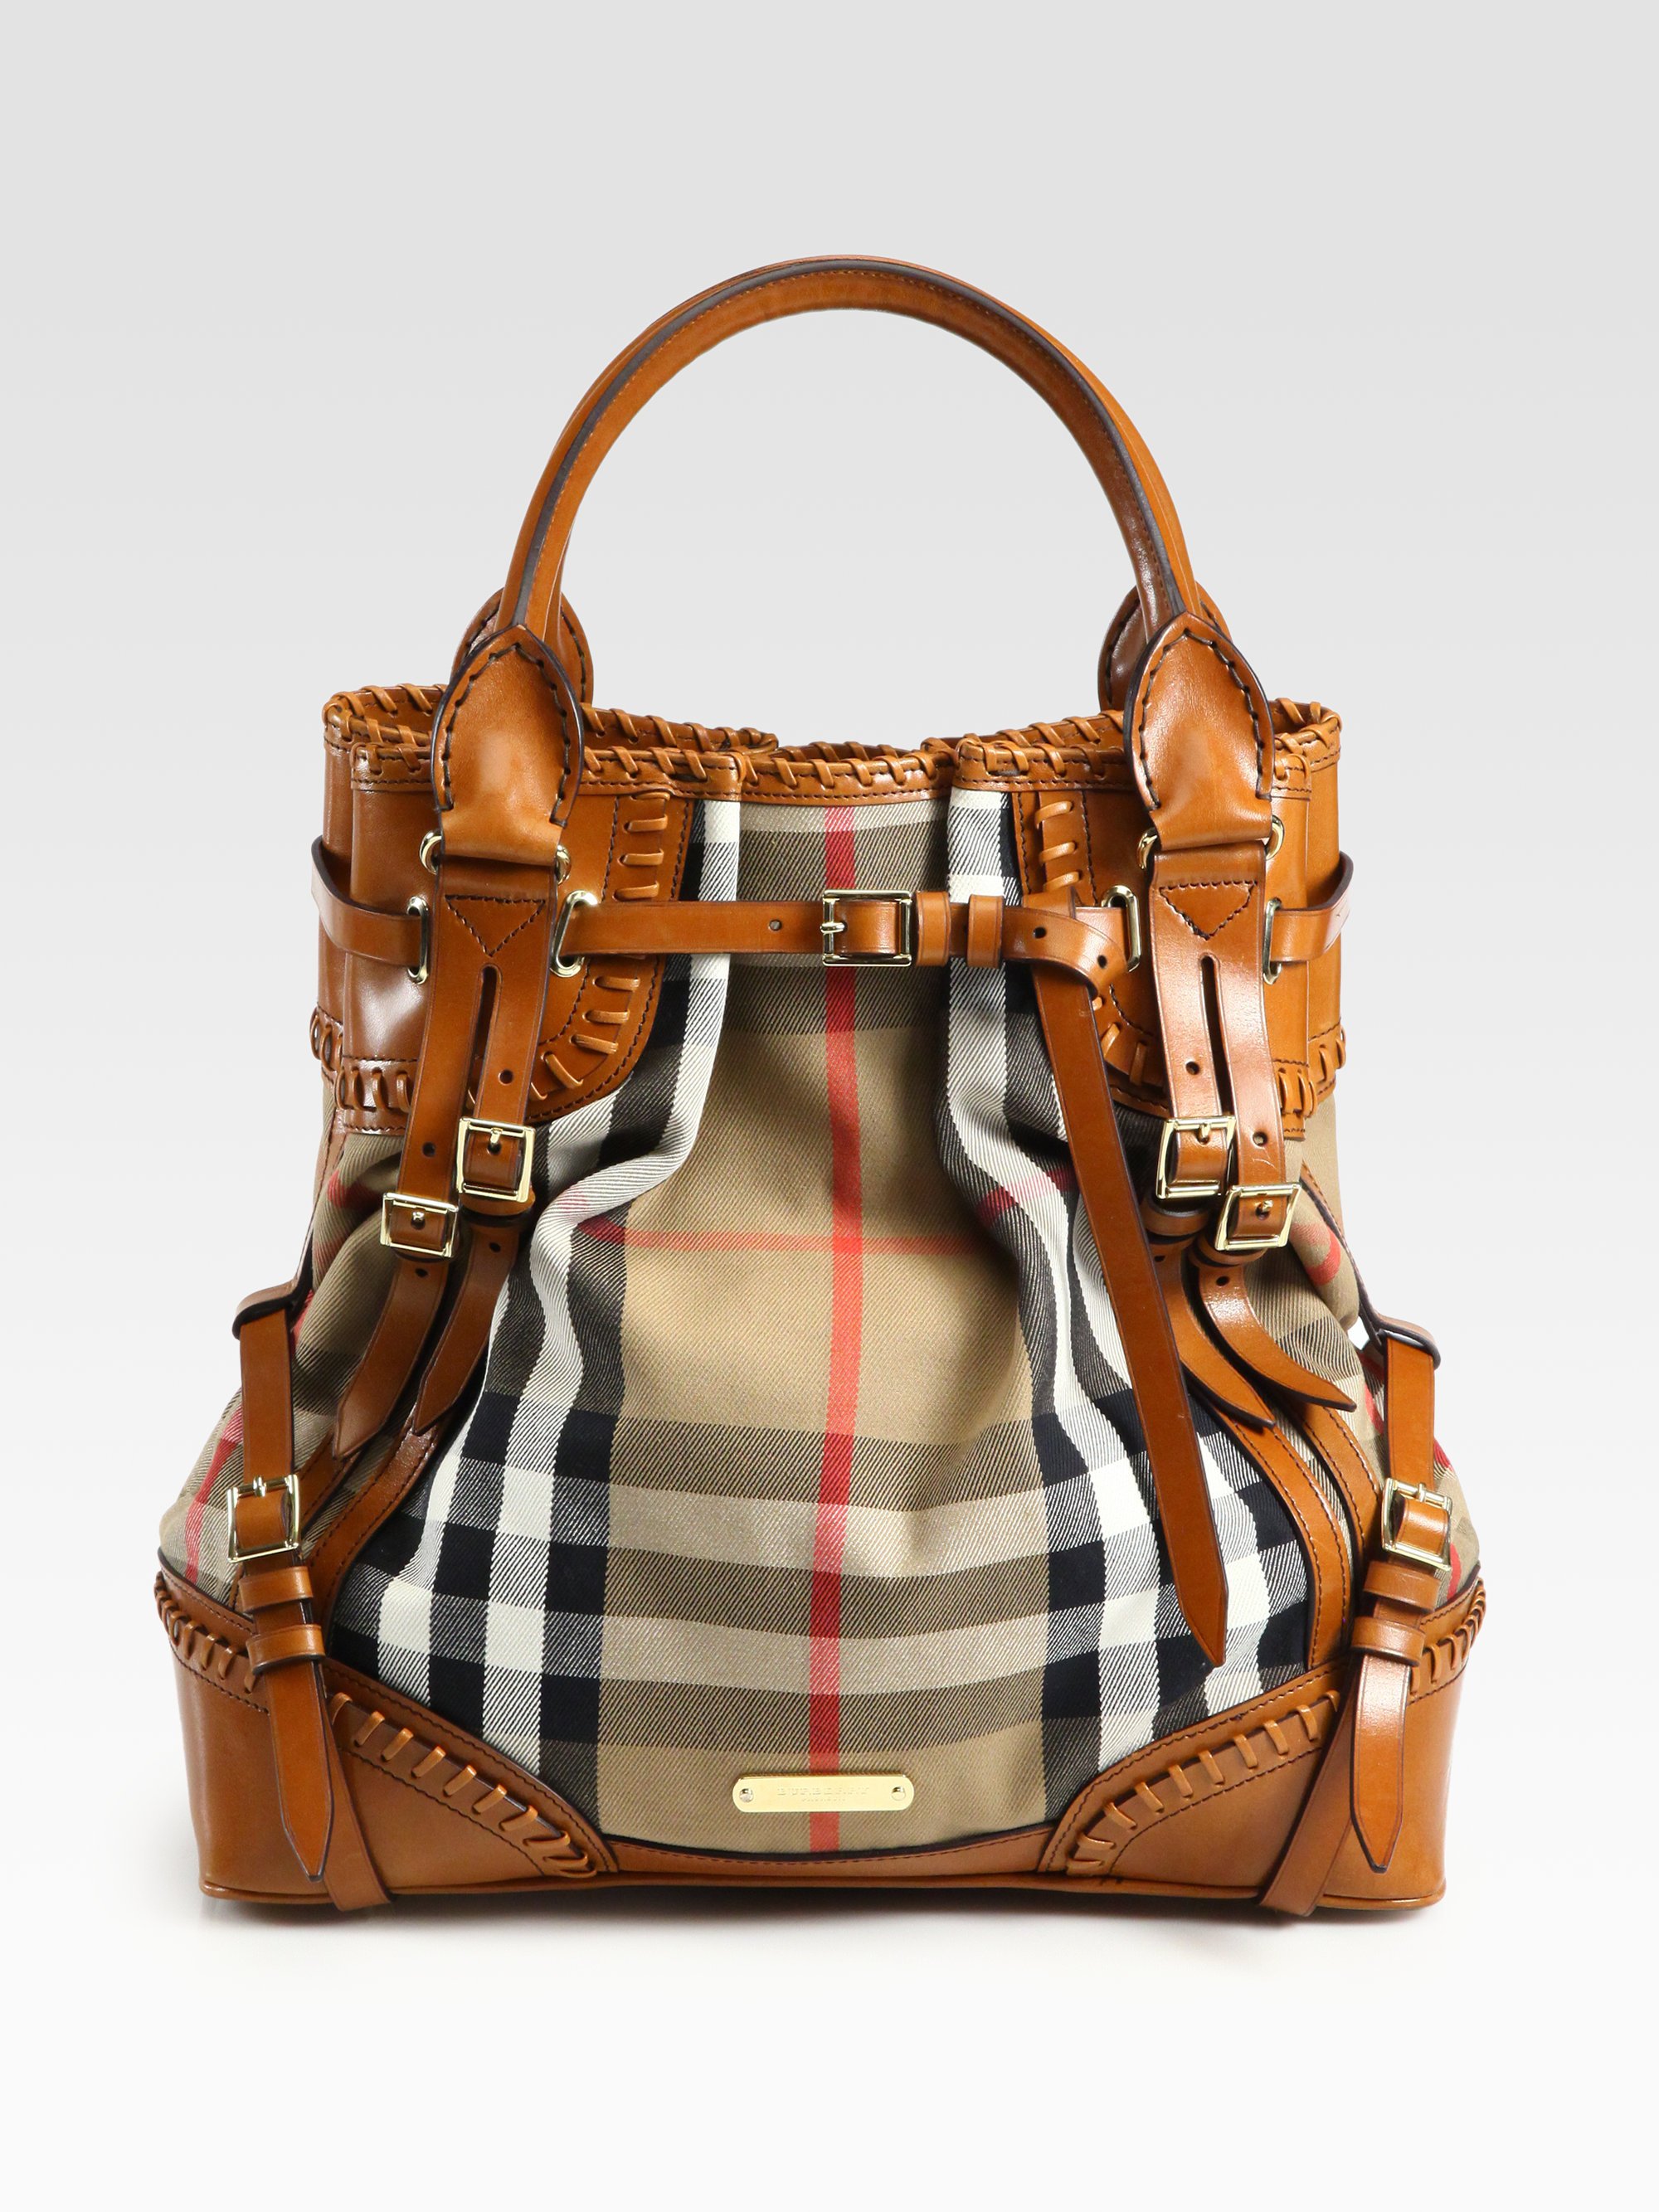 Burberry Prorsum Whipstitch & Check Canvas Tote Bag in Brown | Lyst